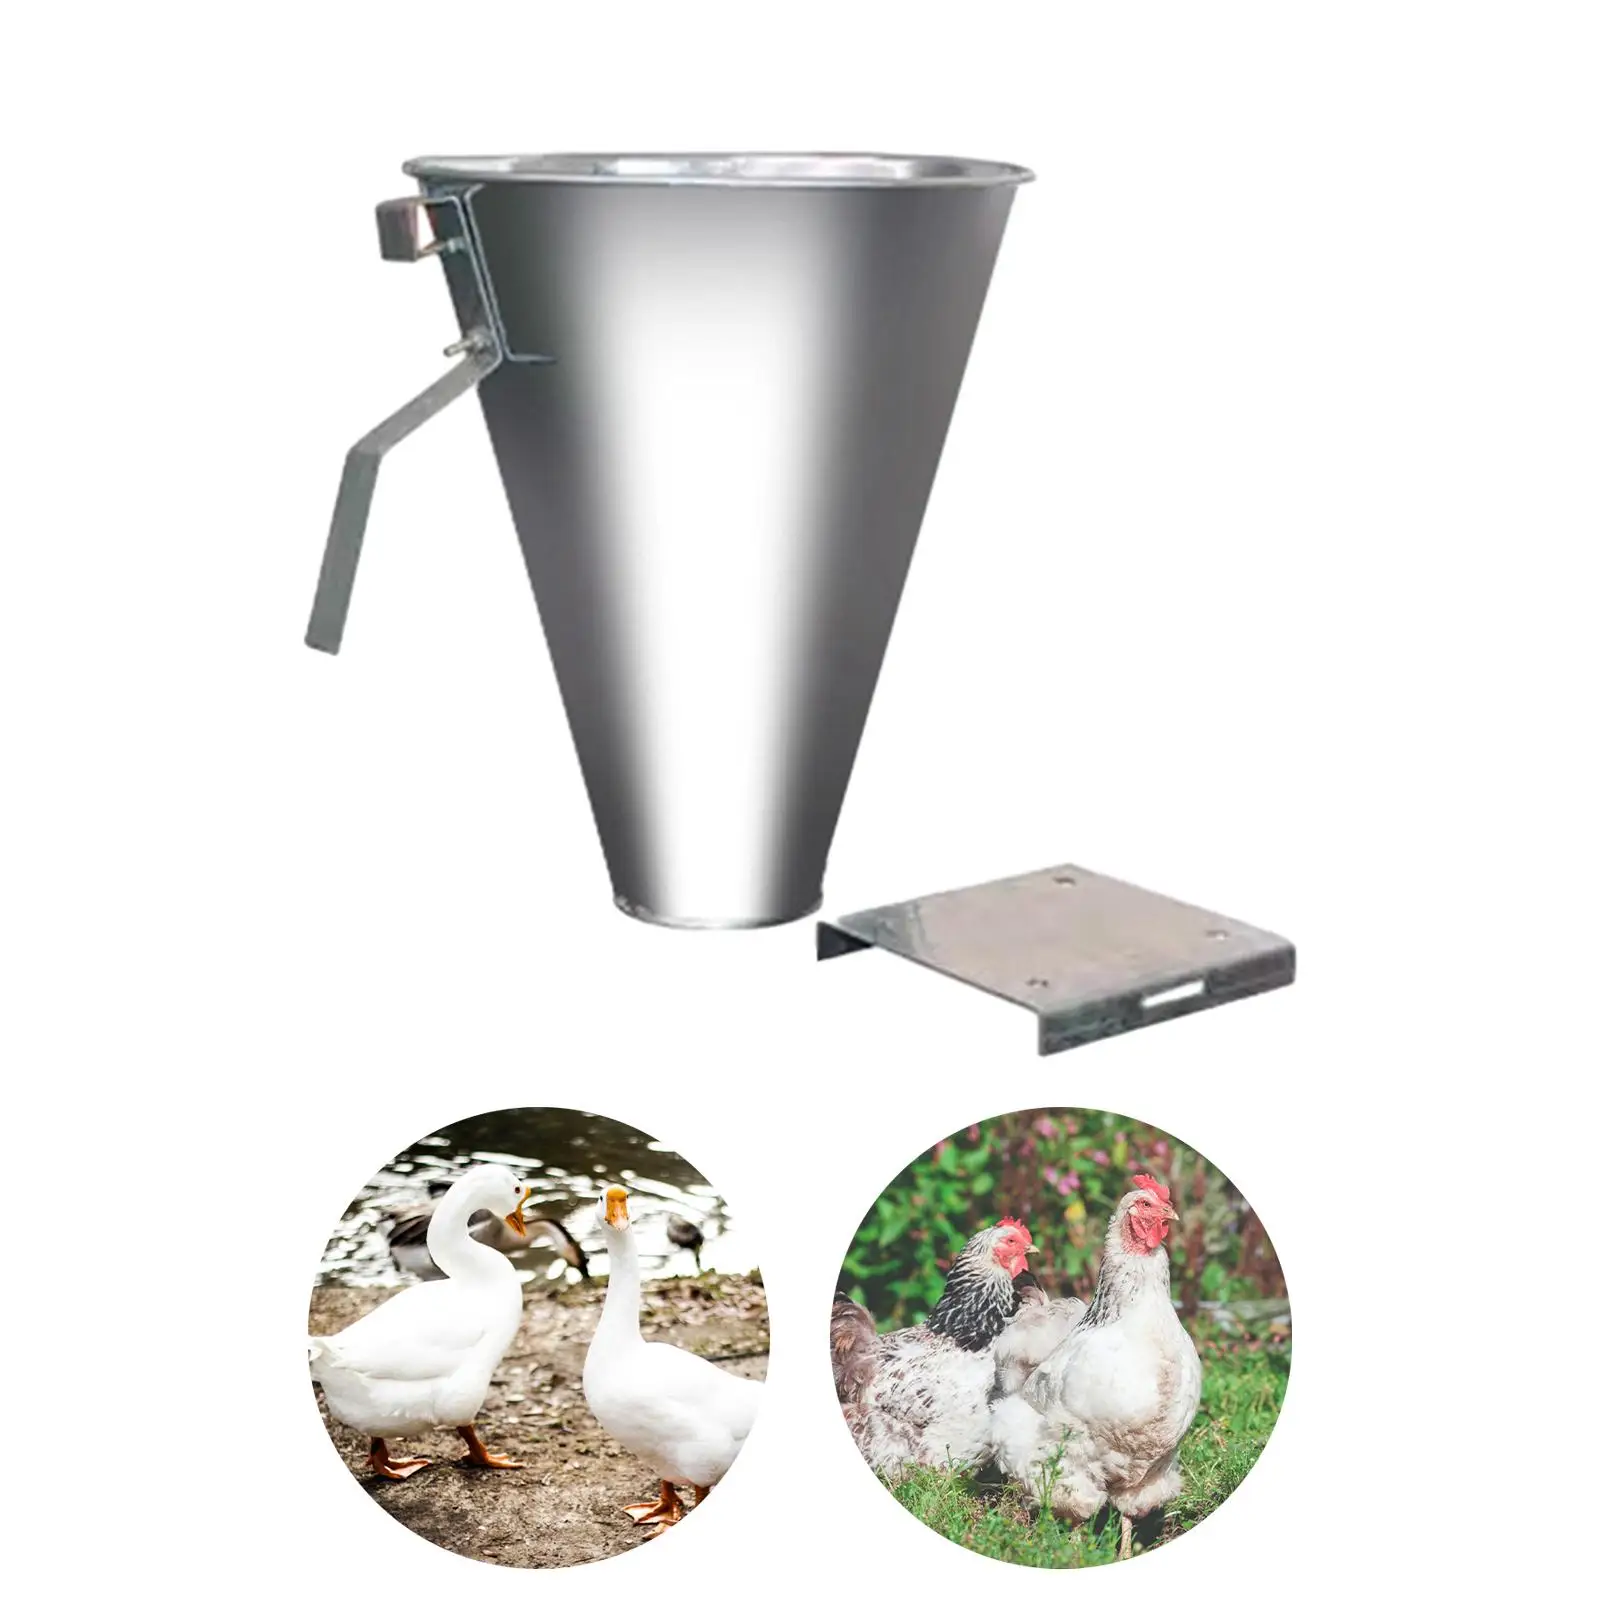 Poultry Restraining Cone Slaughter Tool Easy to Use Galvanized Fittings Durable Killing Chicken Cone Funnel for Processing